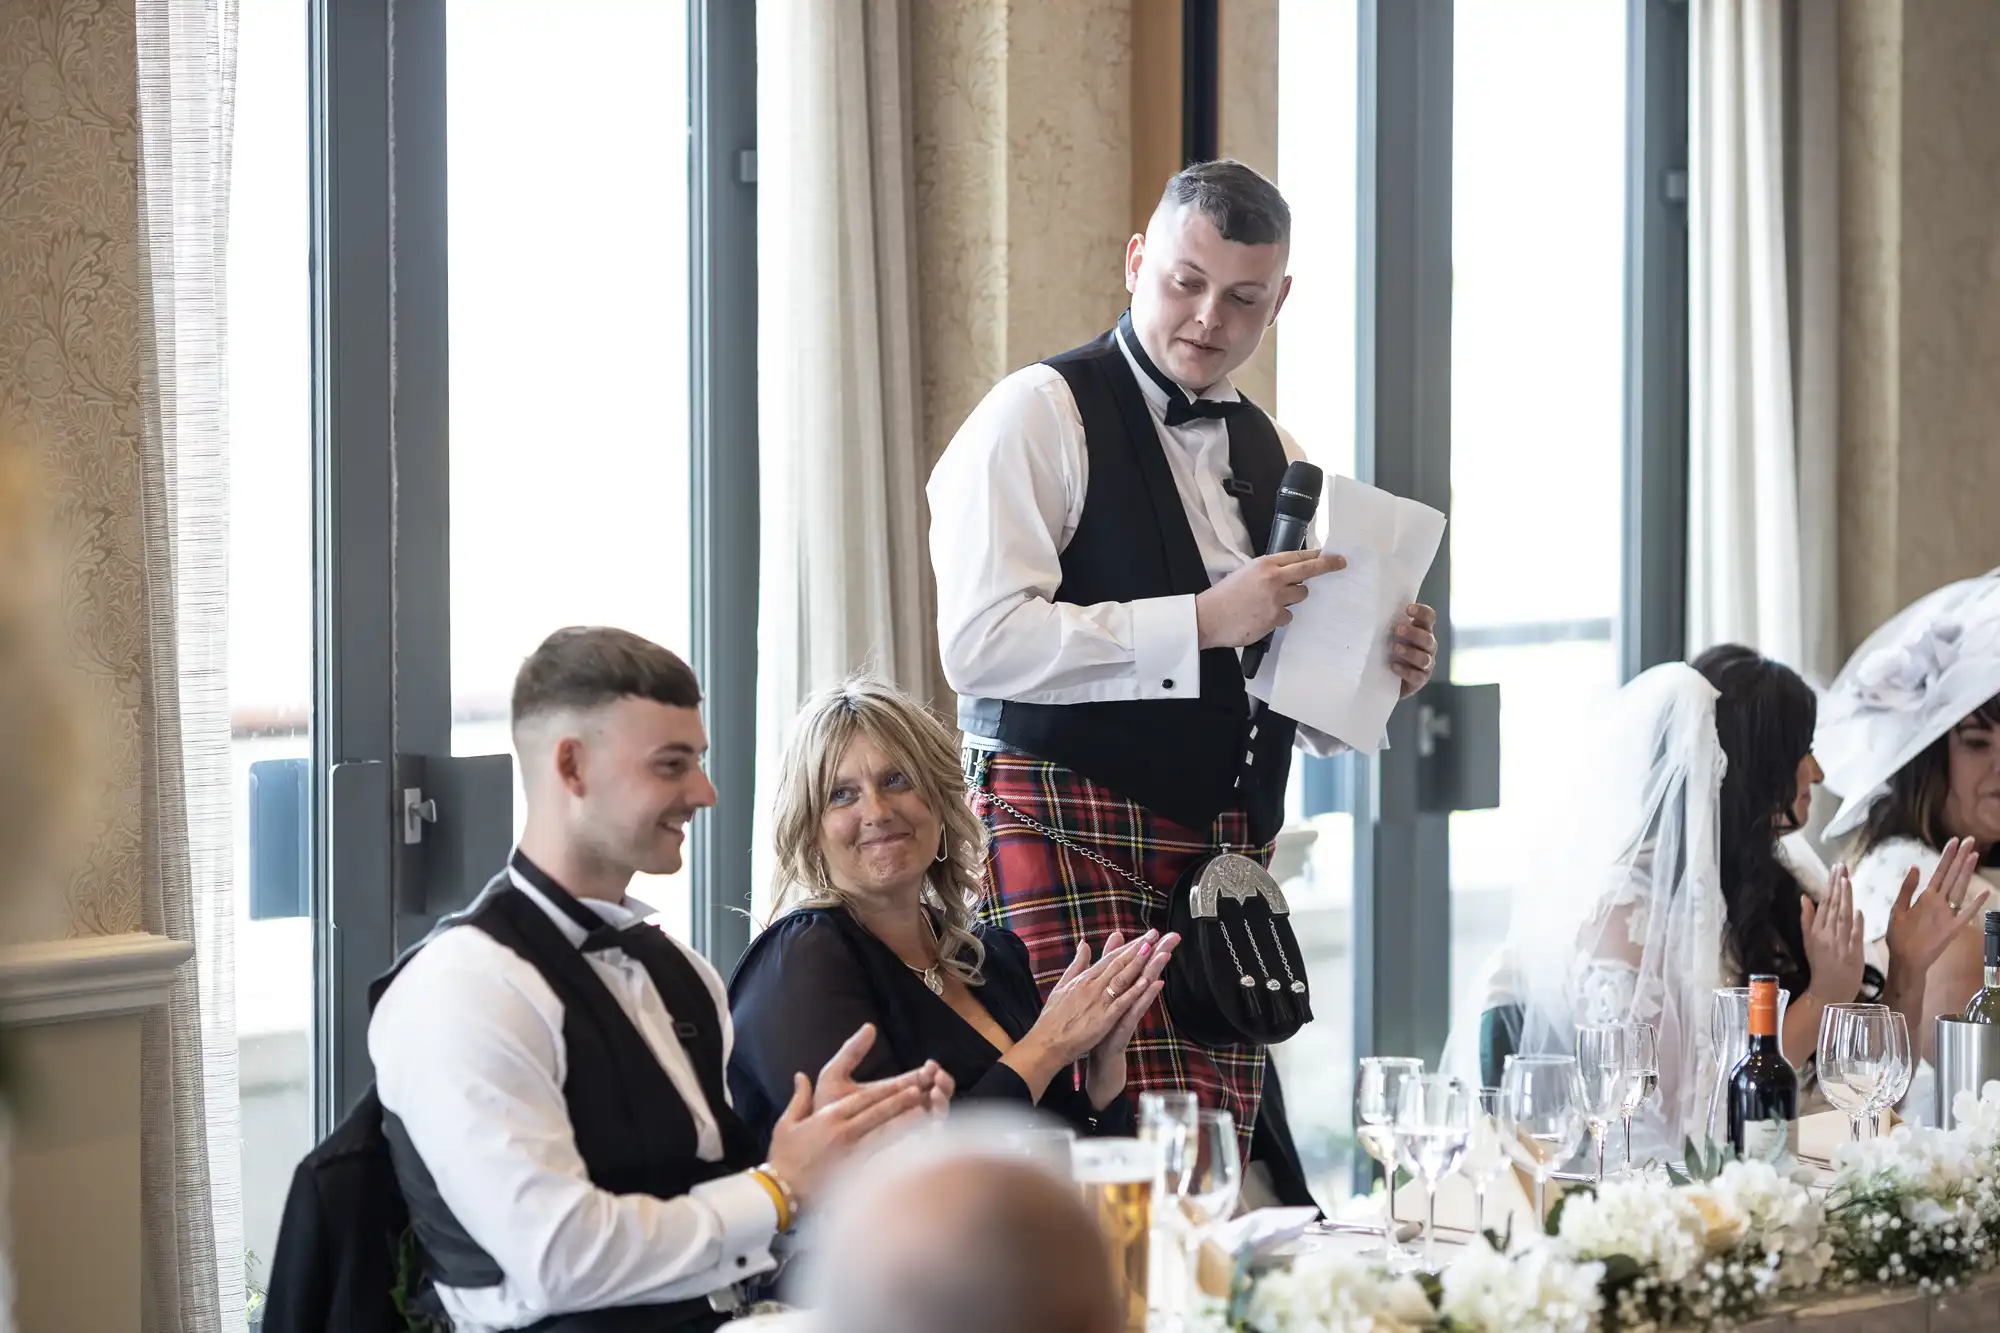 A man in a kilt and vest stands giving a speech at a wedding, holding a paper, as guests in formal attire listen and applaud in a room with large windows.